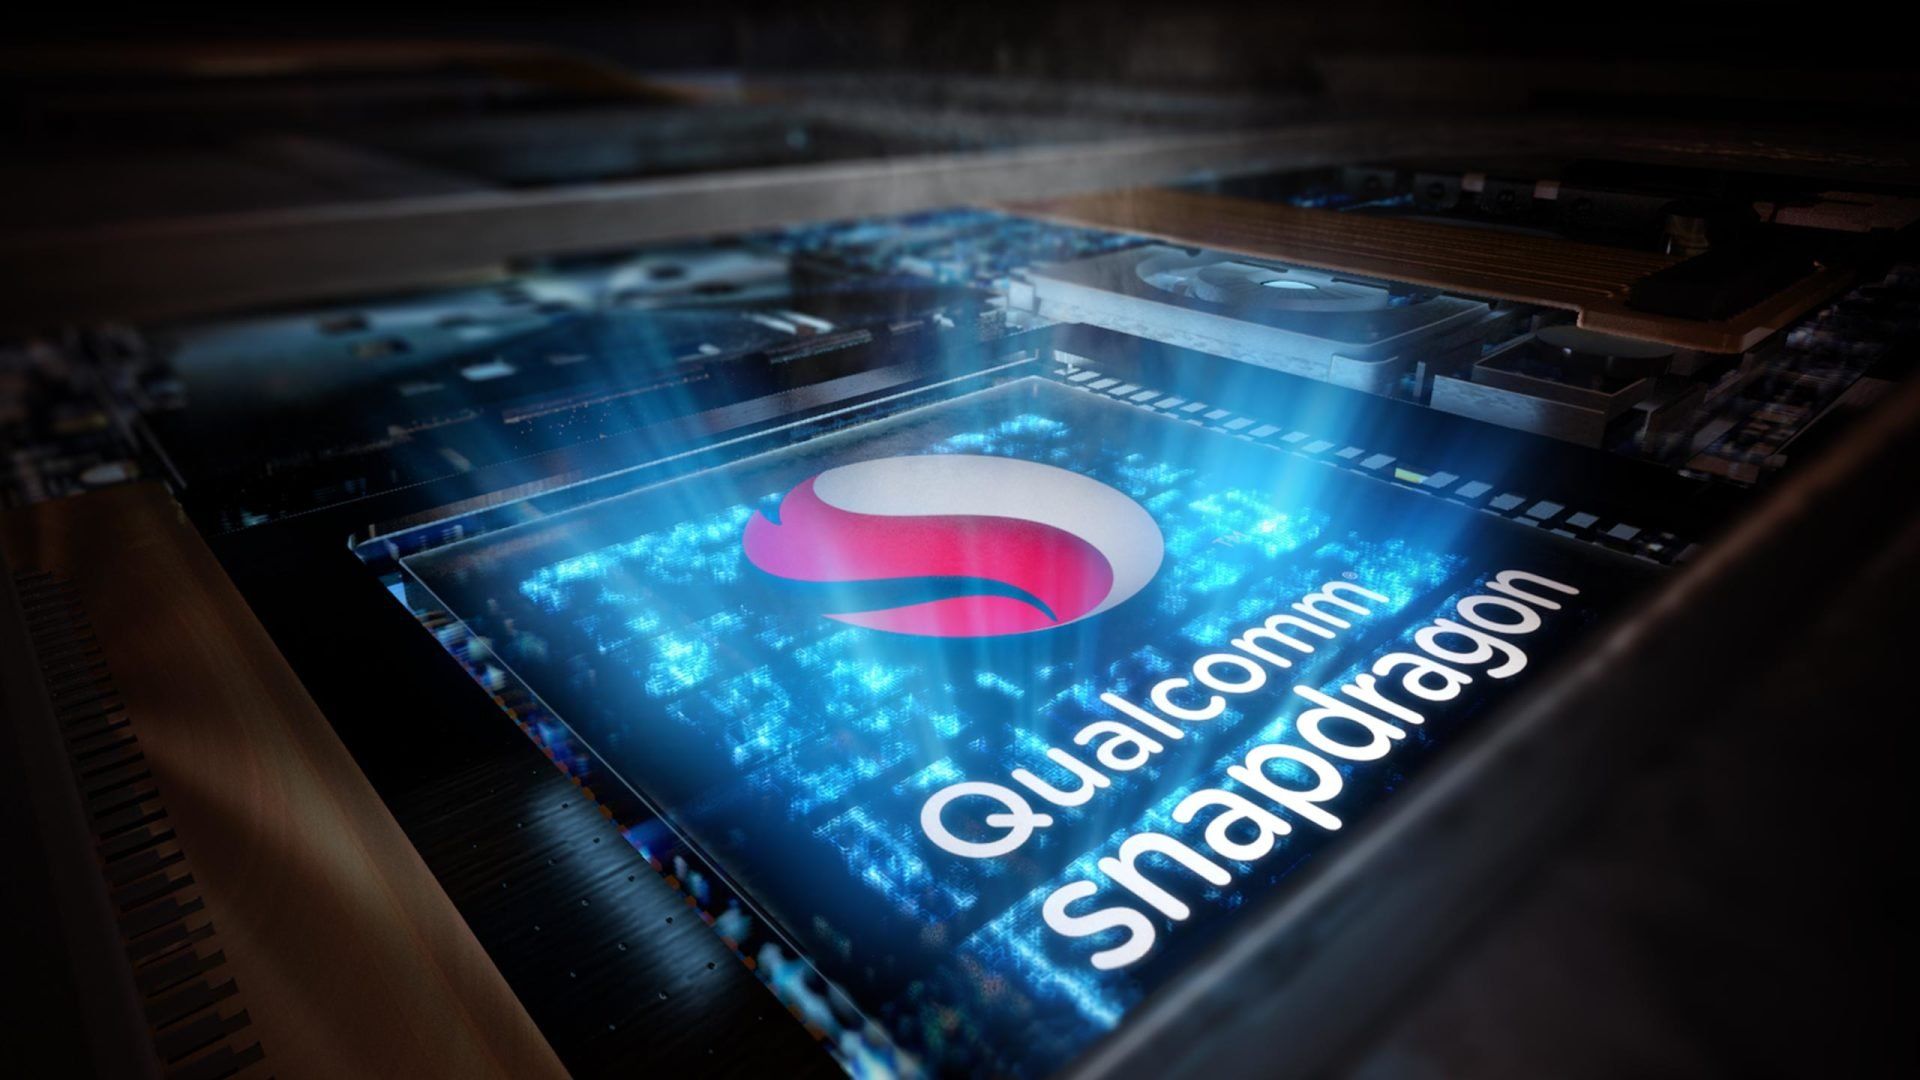 Qualcomm is planning to build a gaming tablet like Nintendo Switch